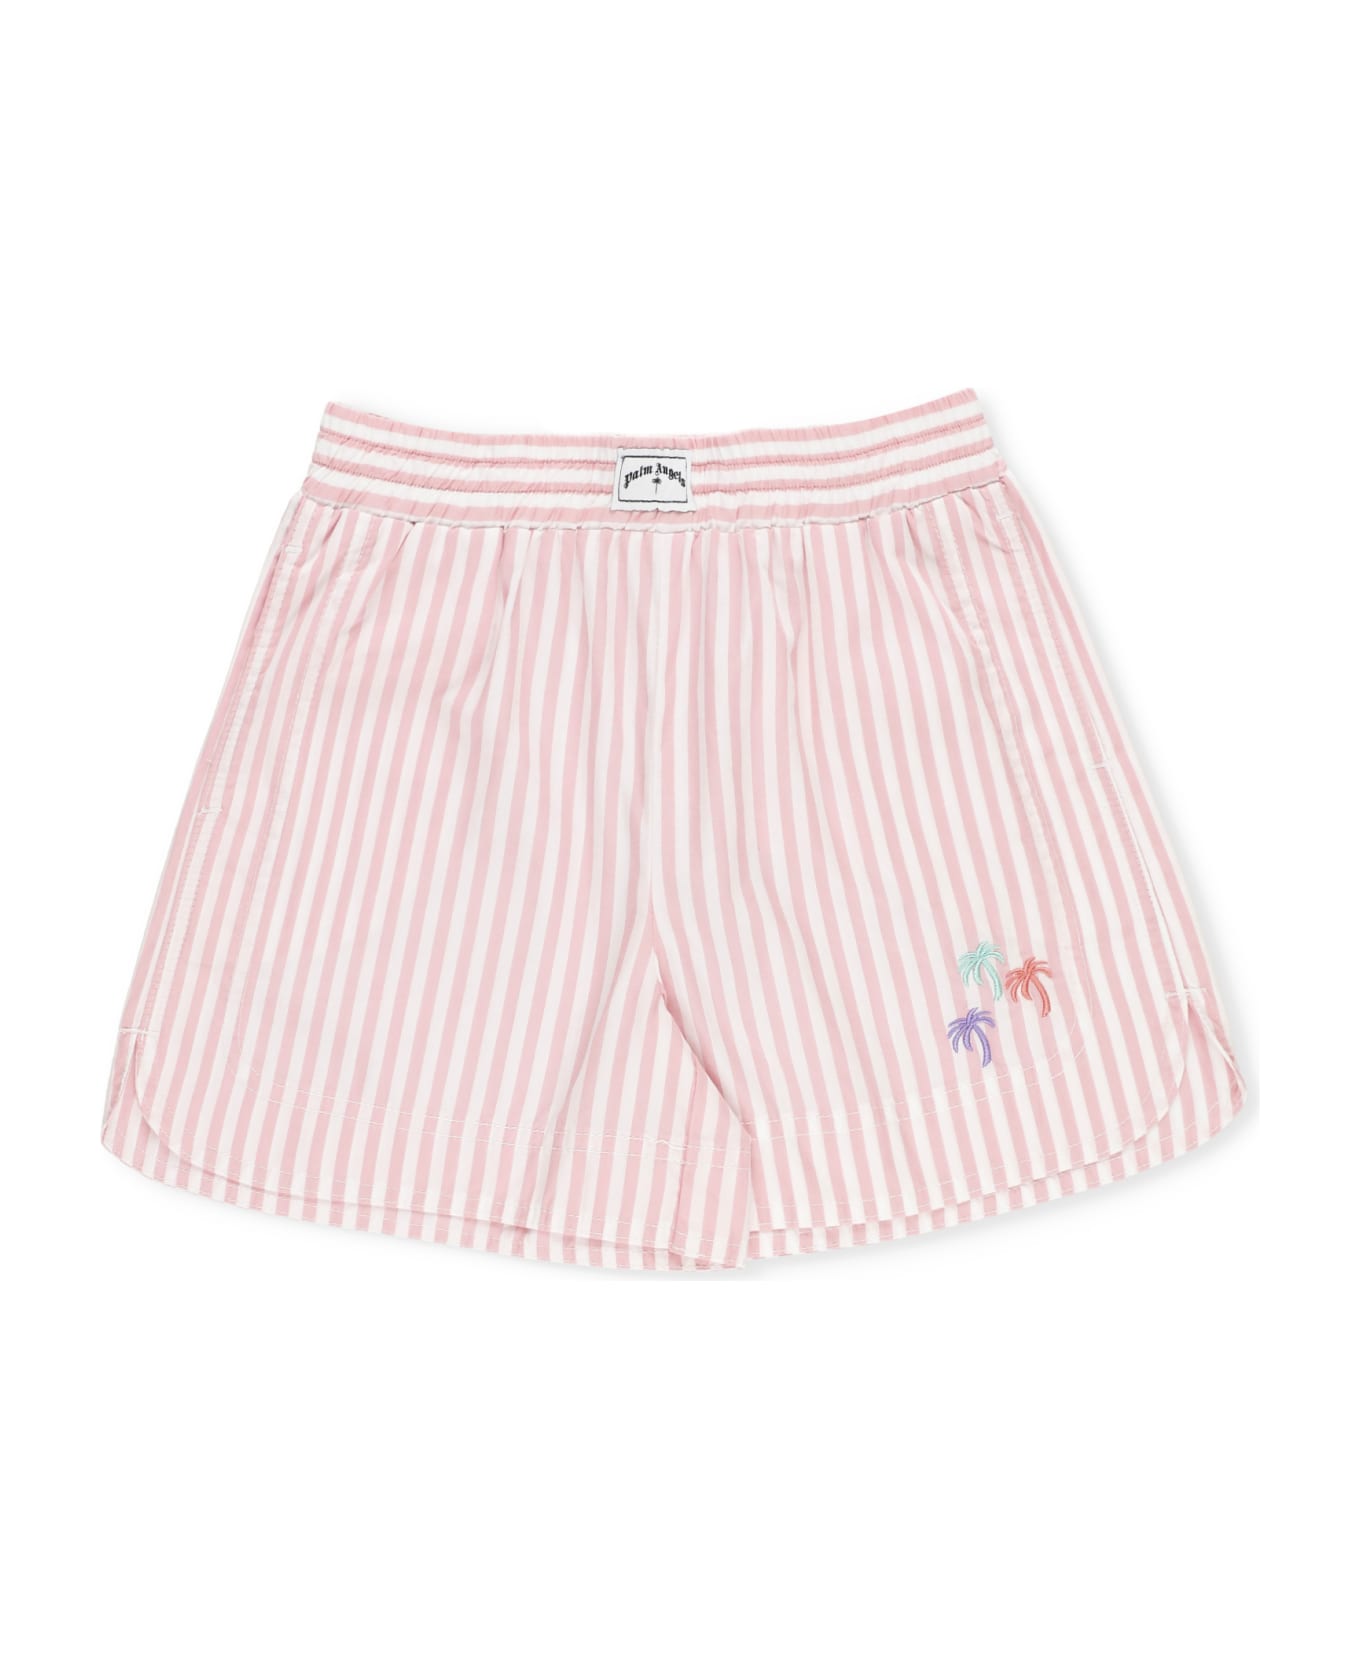 Palm Angels Striped Shorts - Pink